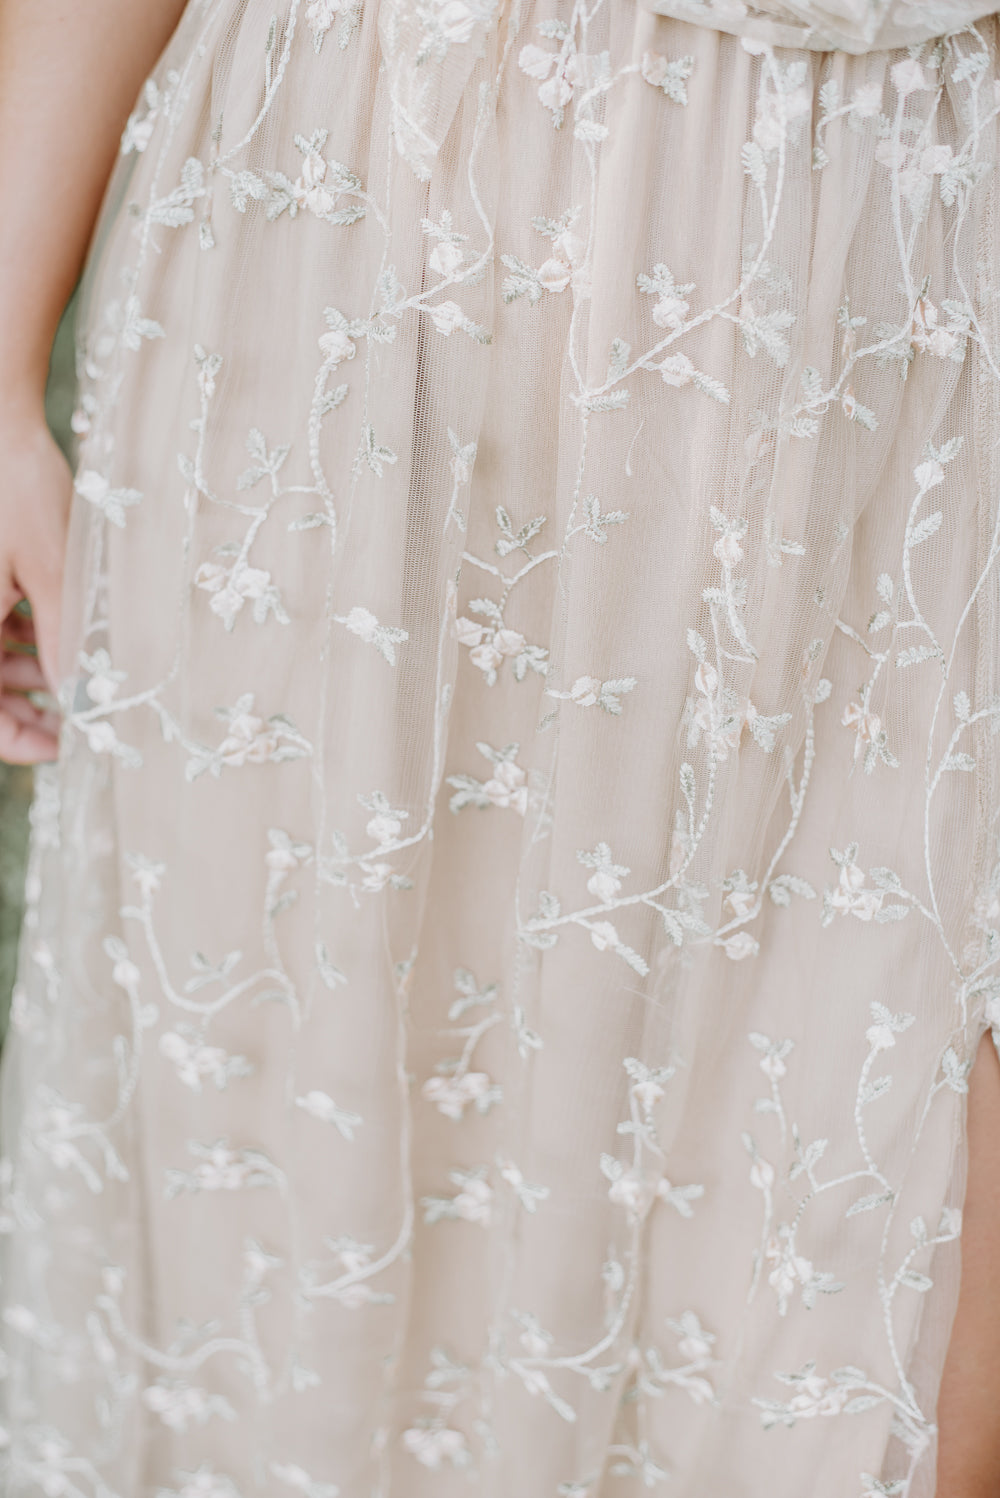 ECB Exclusive: Dreamy Floral Embroidered Maxi Dress